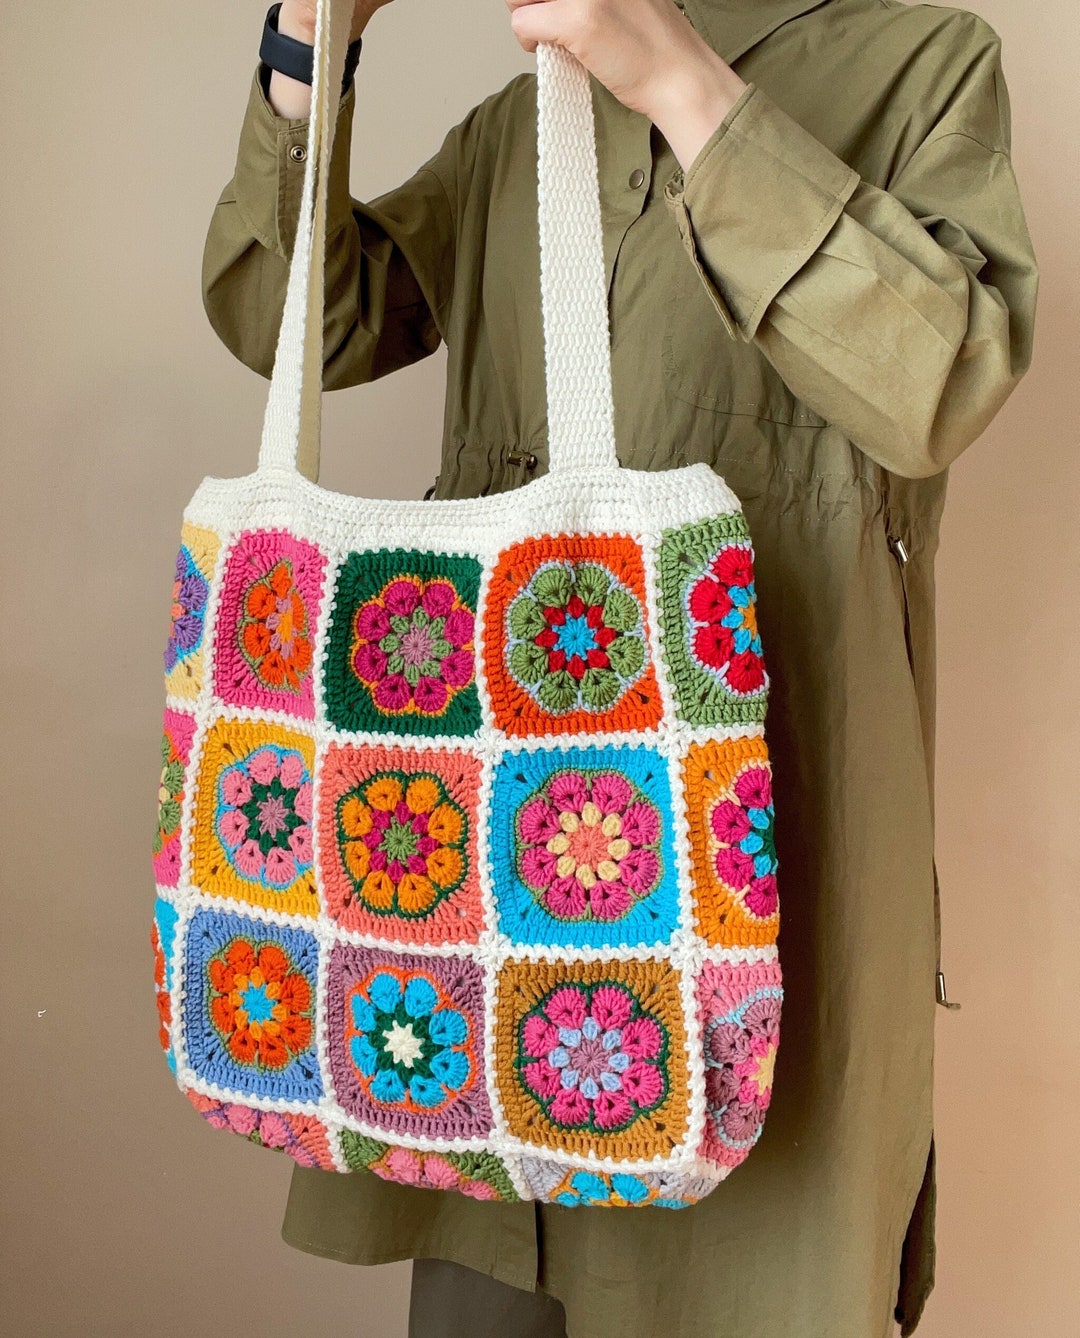 Crochet Colorful African Flowers Tote Bag off White Hobo Bag - Etsy